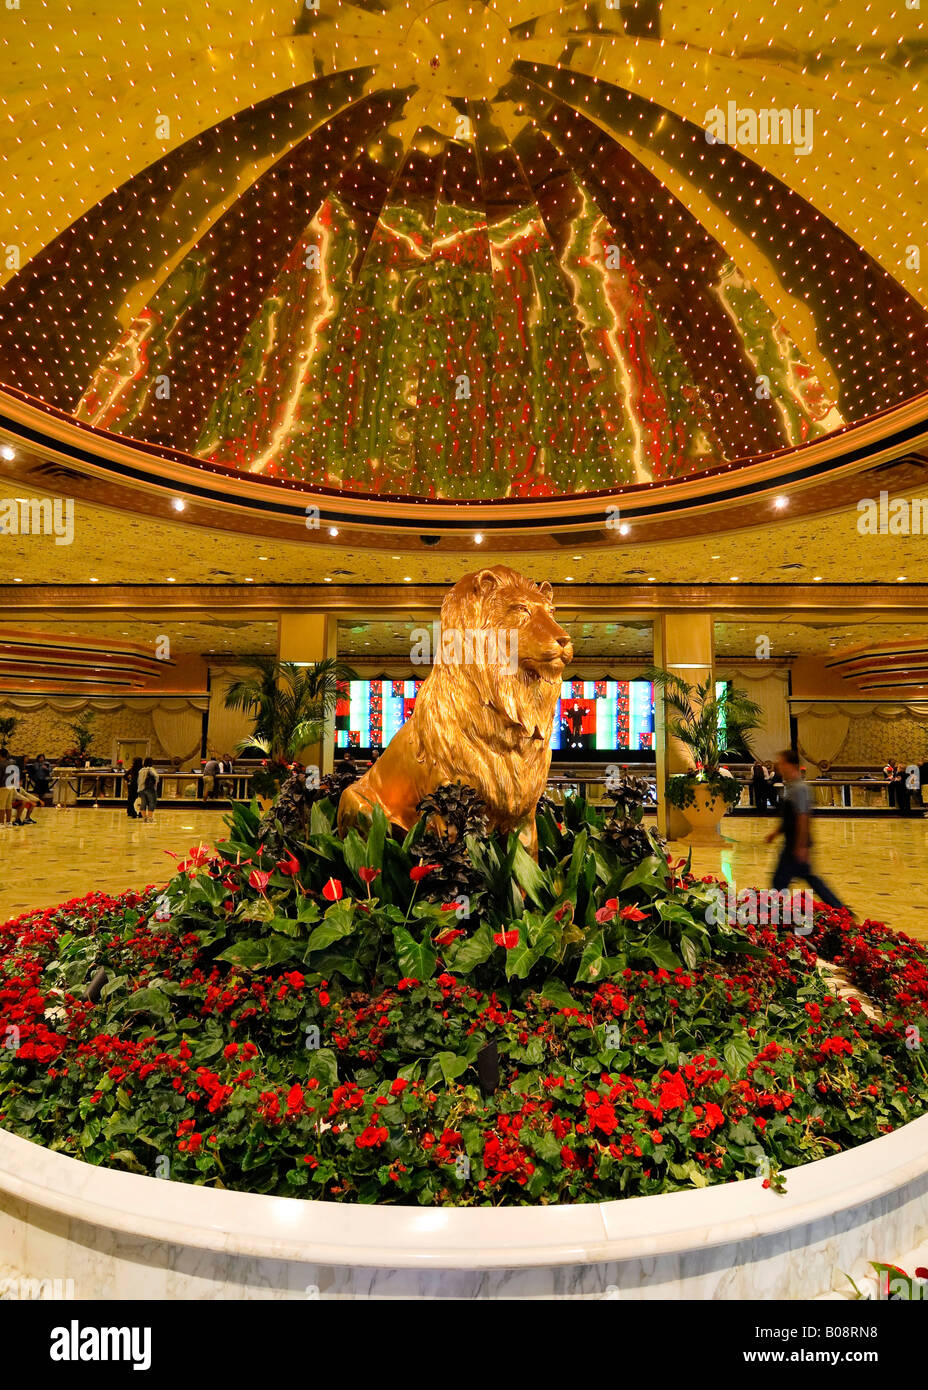 Statue of a golden lion surrounded by red flowers under a golden dome in the lobby of the MGM Grand Hotel and Casino, Las Vegas Stock Photo